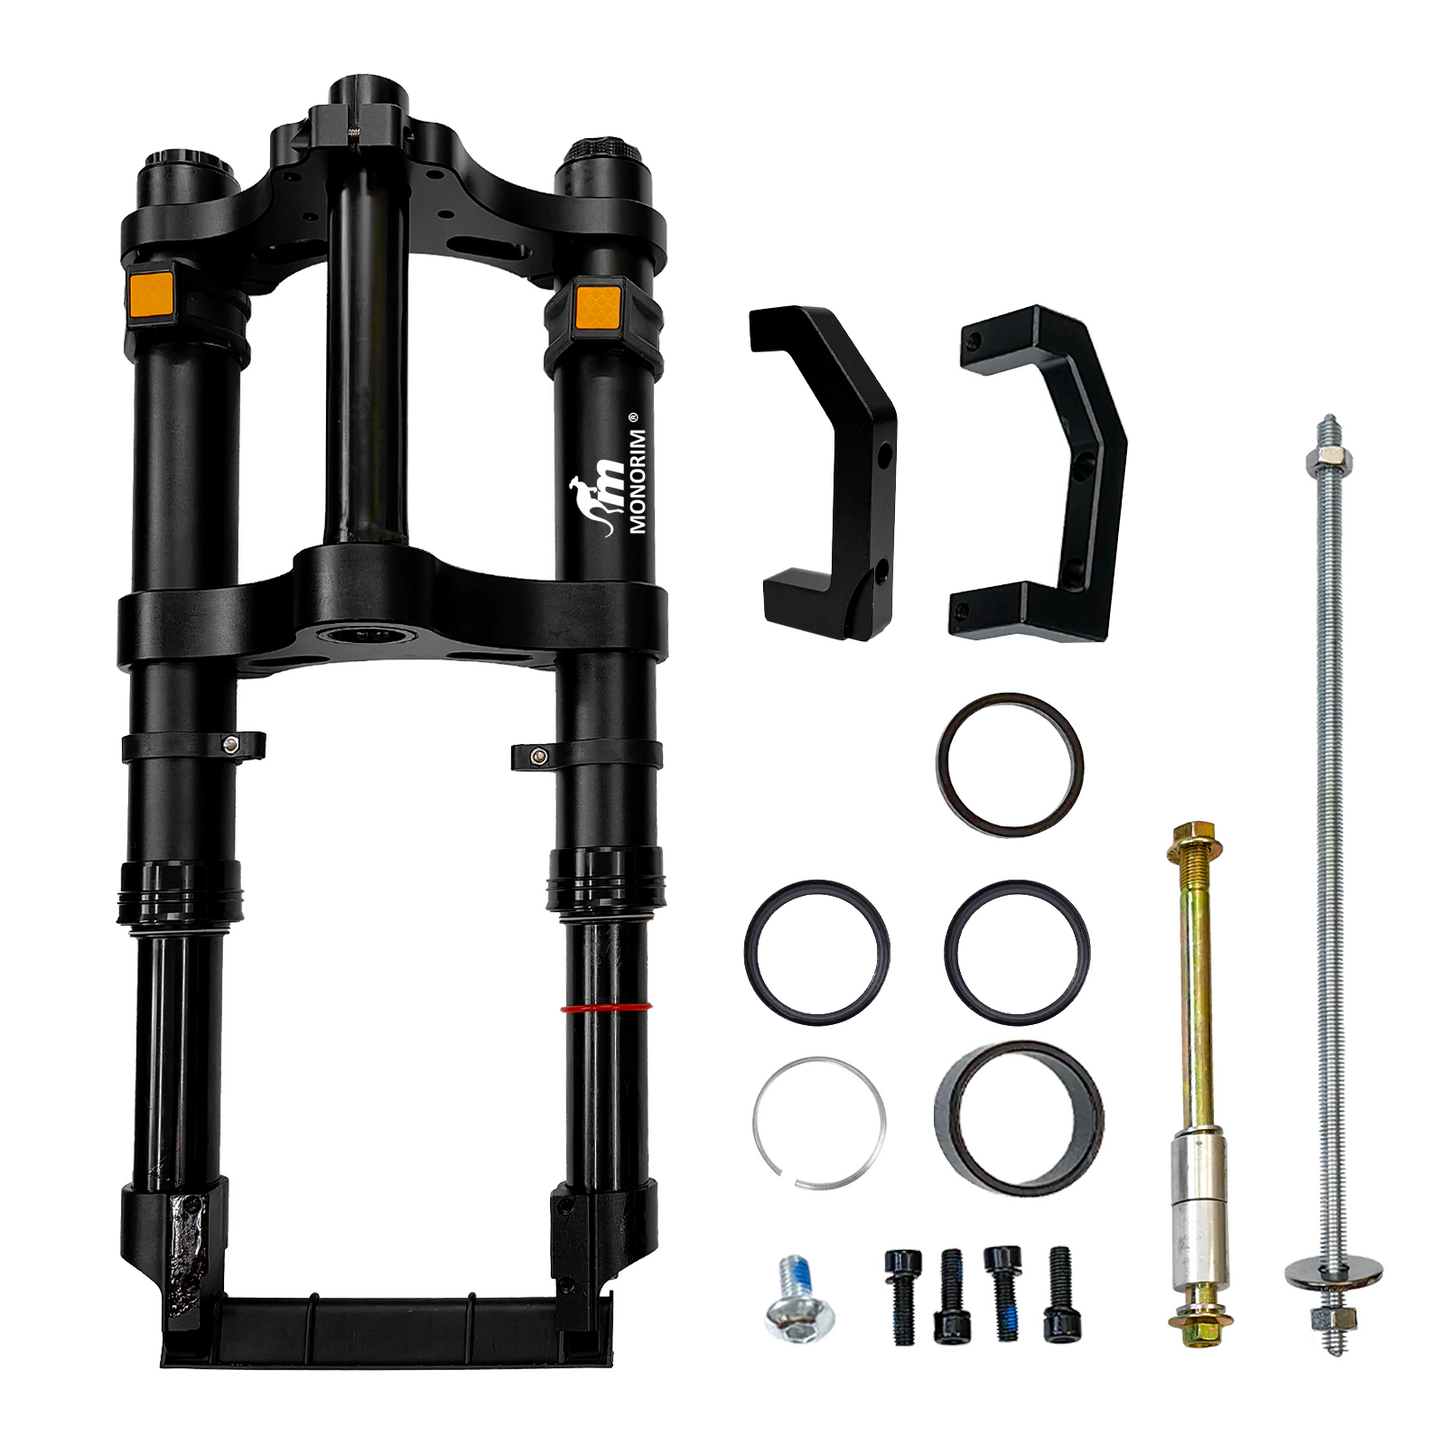 Monorim MB0-12inch front air suspension modify great kit to be more safety and comfort for Fiido Q1s ebike